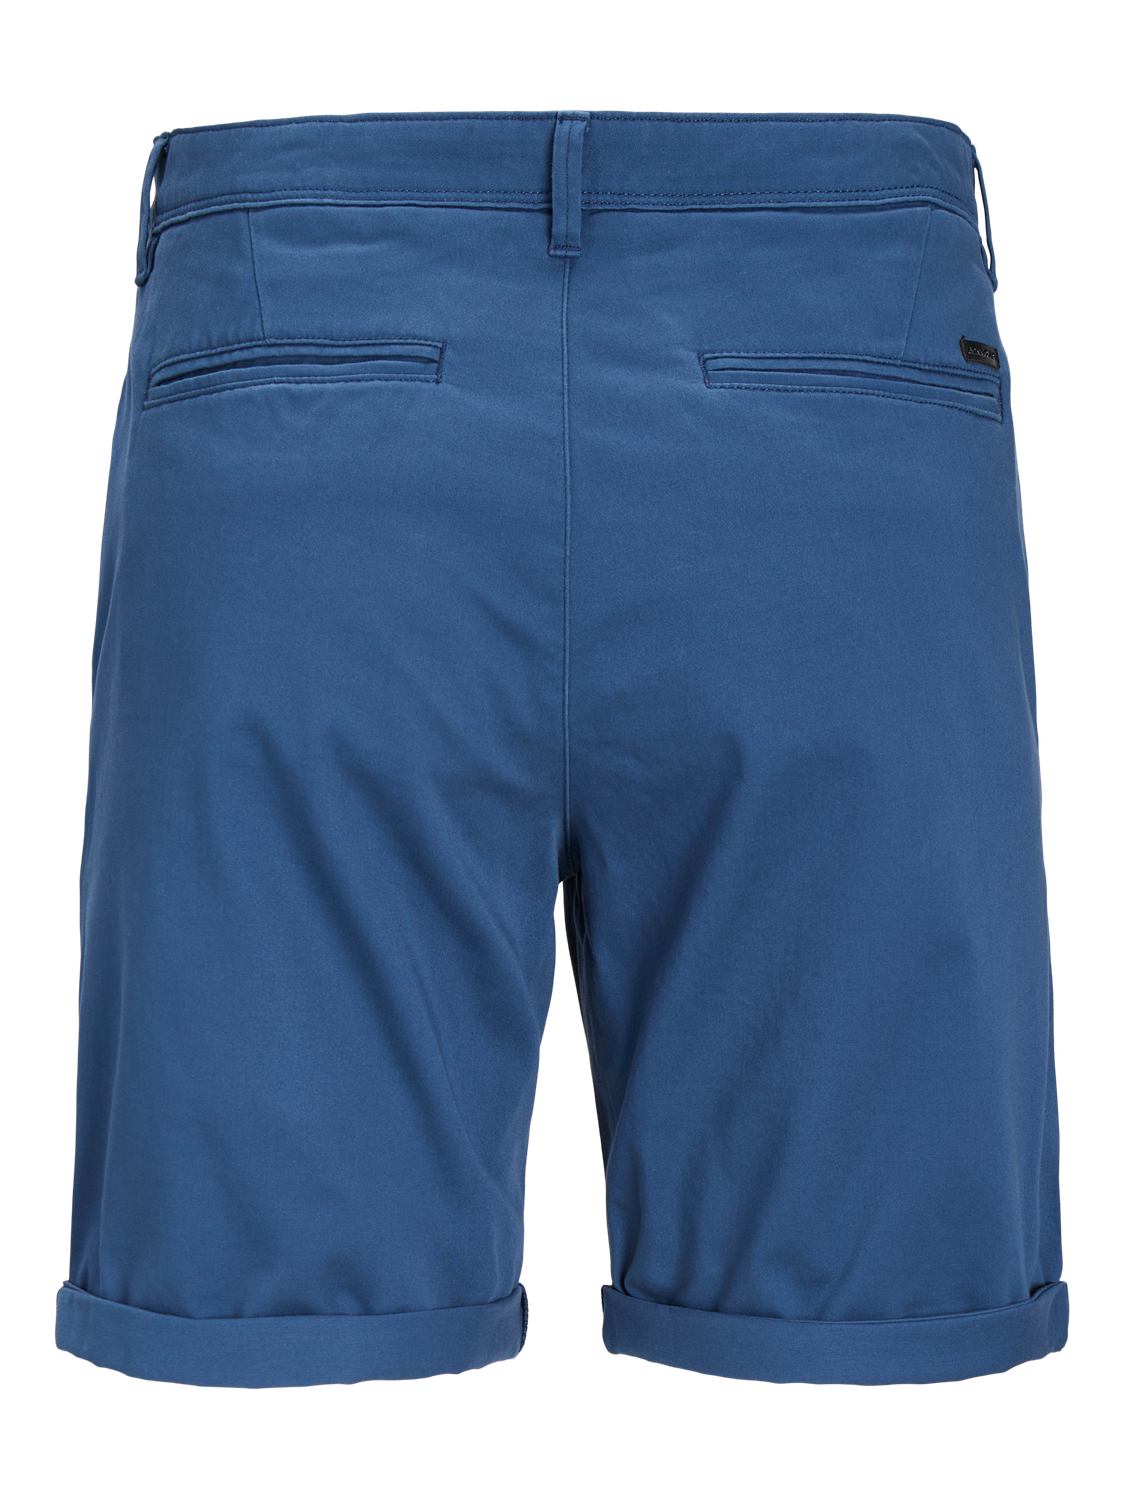 JPSTBOWIE Shorts - Ensign Blue